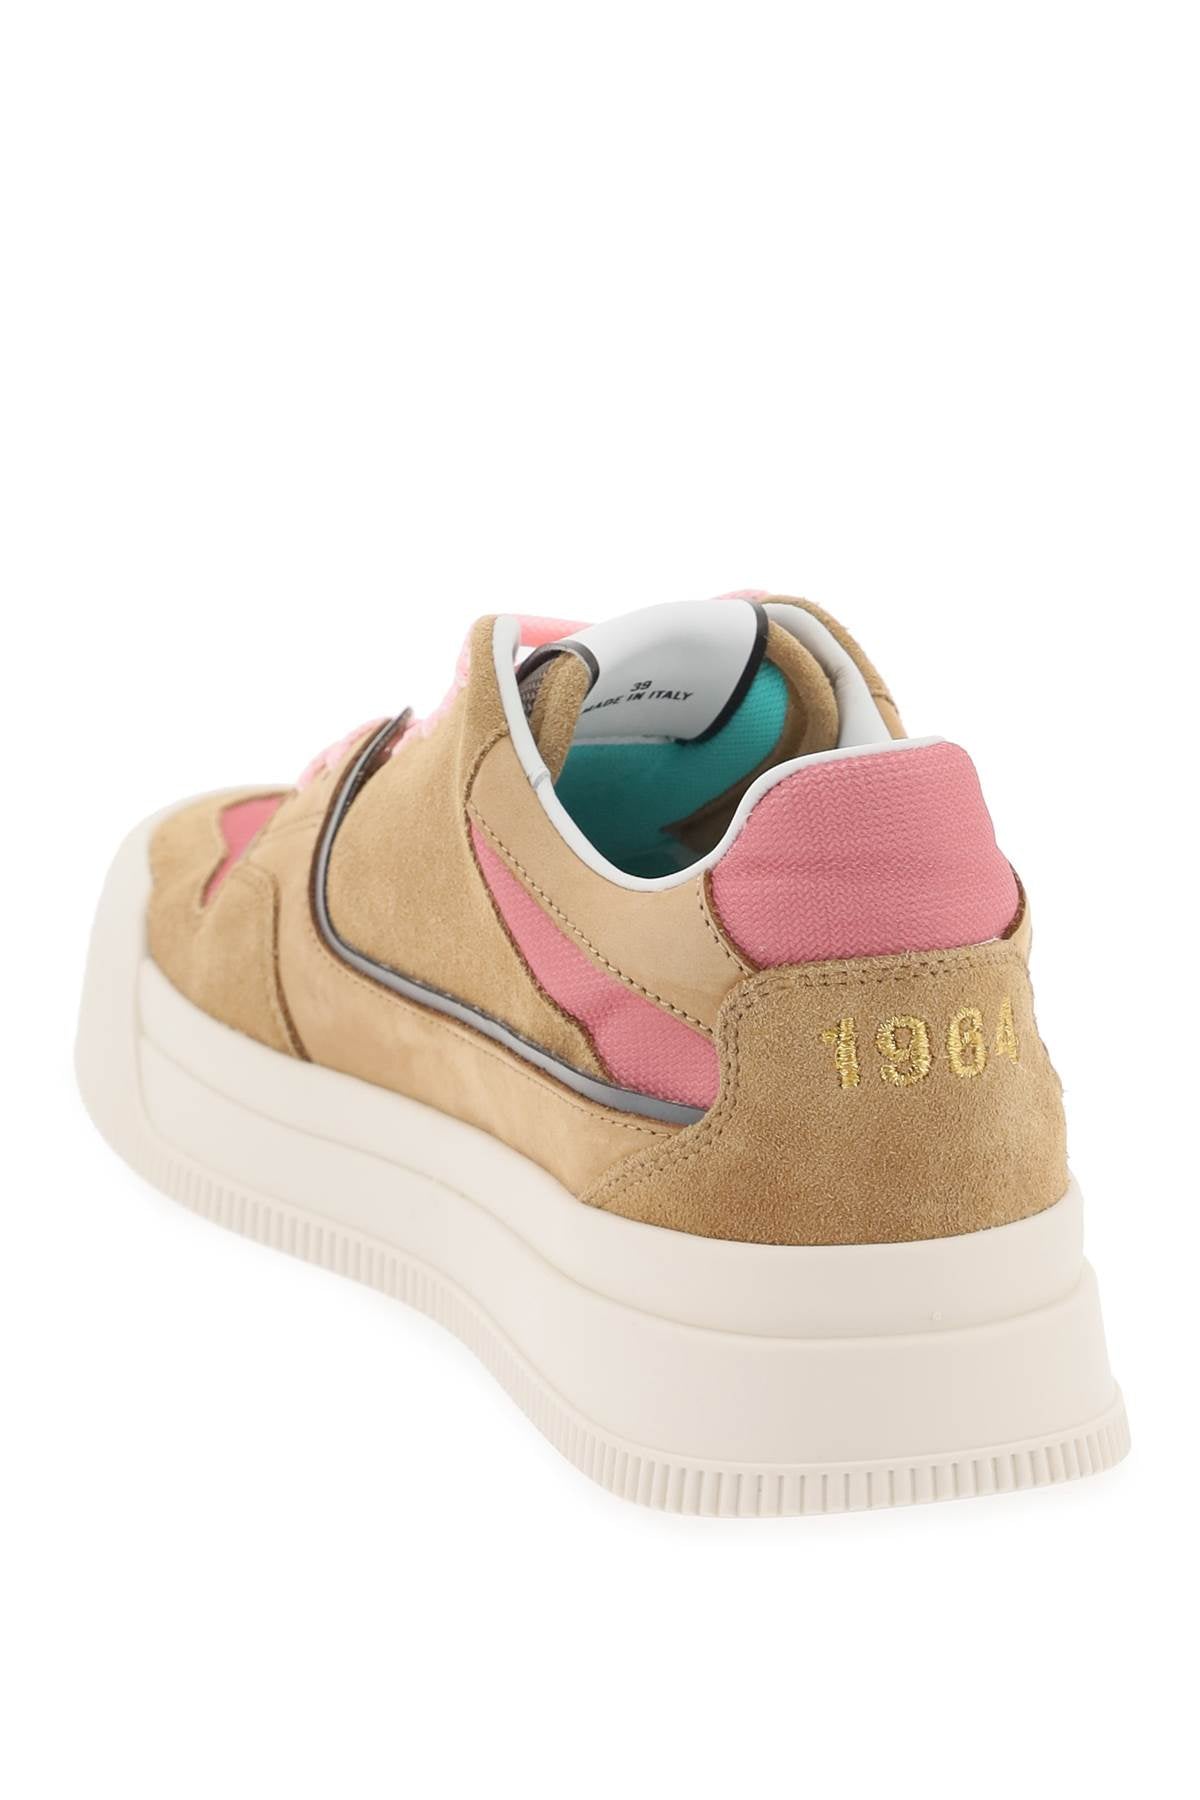 Dsquared2 suede new jersey sneakers in leather-2